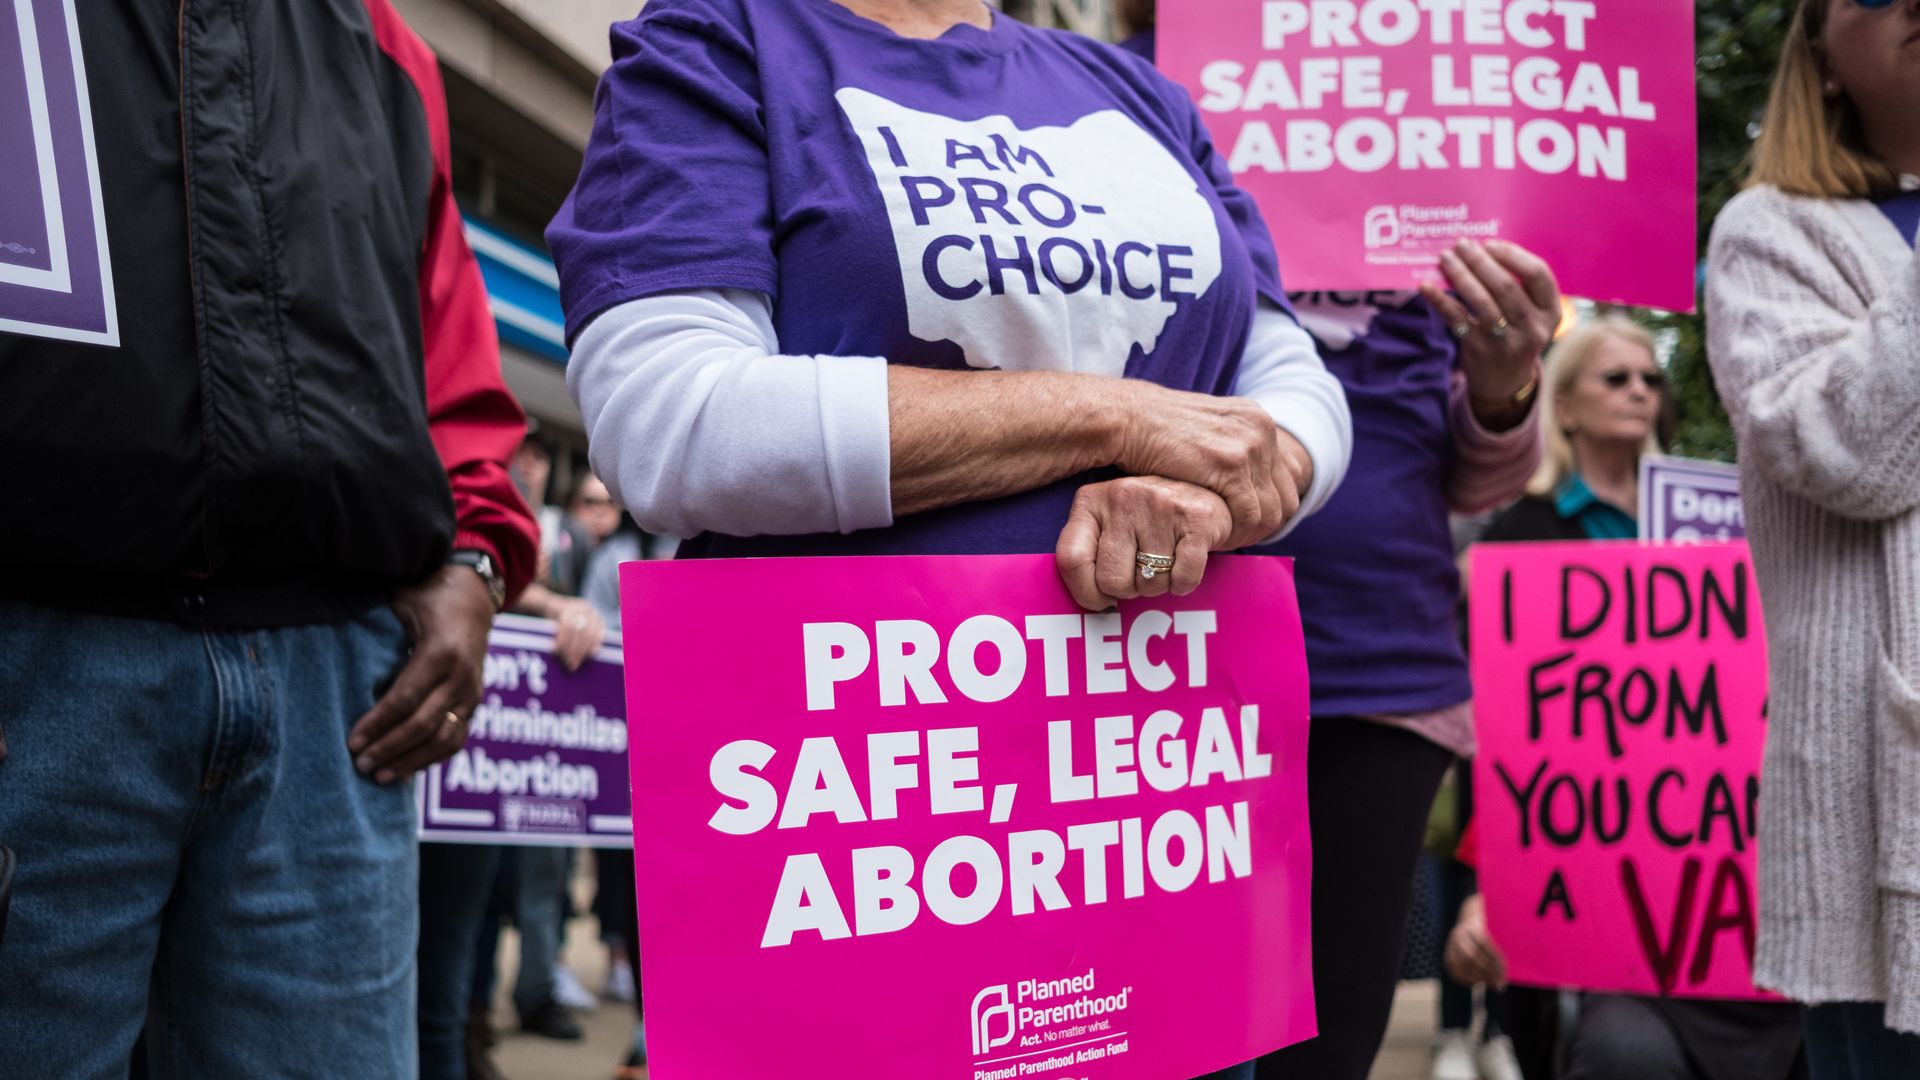 Picture of a person holding a placard that says "protect safe, legal abortion"